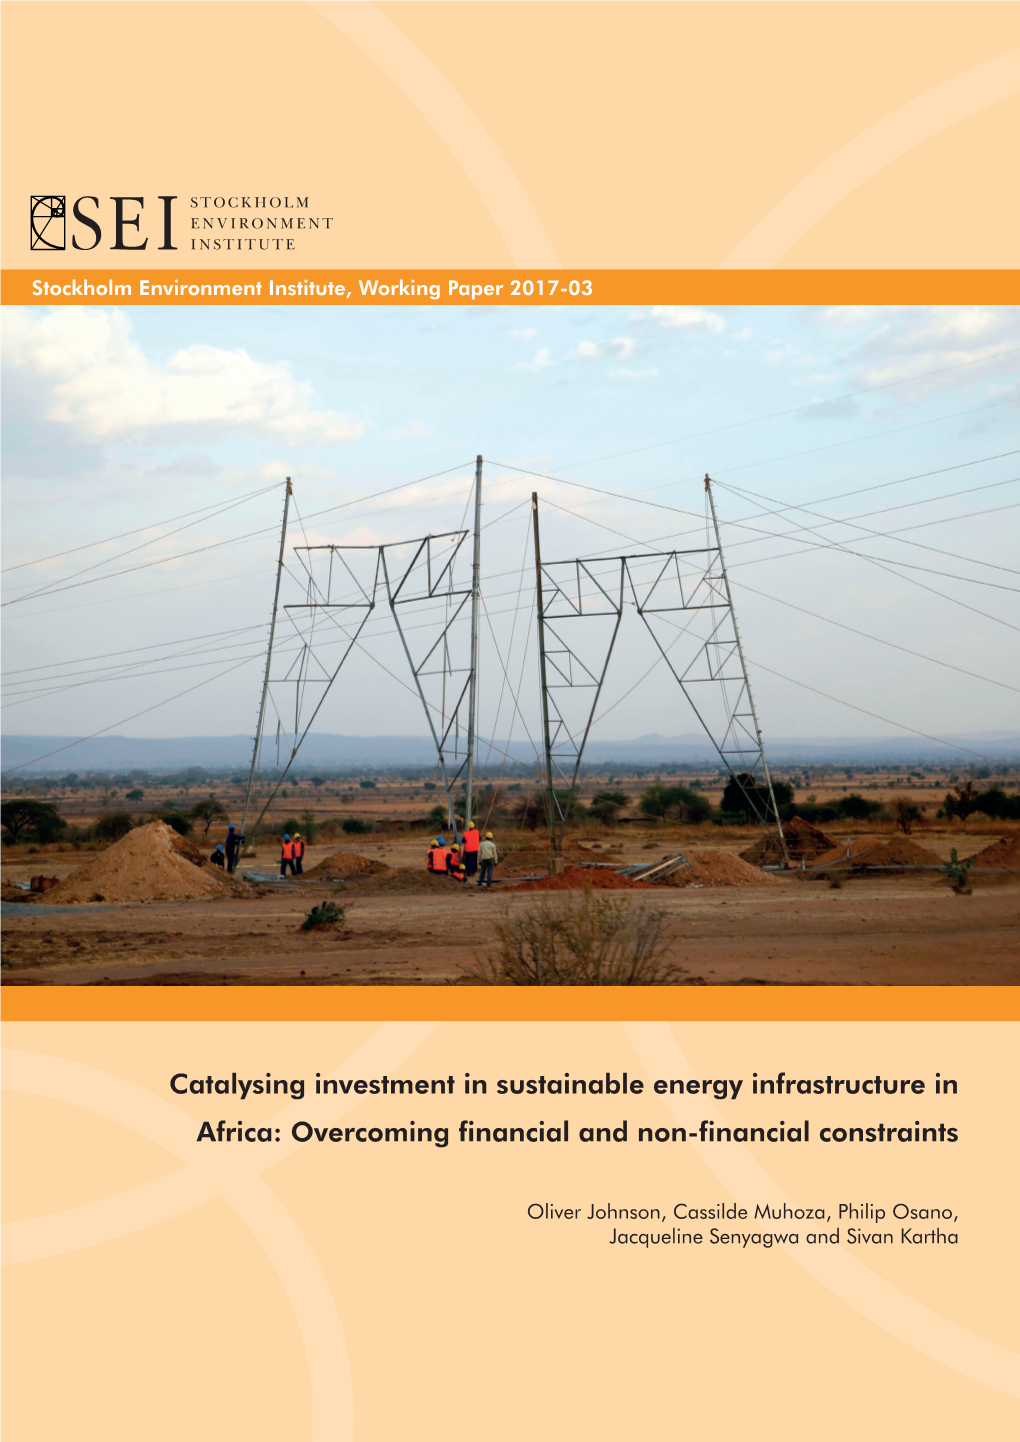 Catalysing Investment in Sustainable Energy Infrastructure in Africa: Overcoming Financial and Non-Financial Constraints